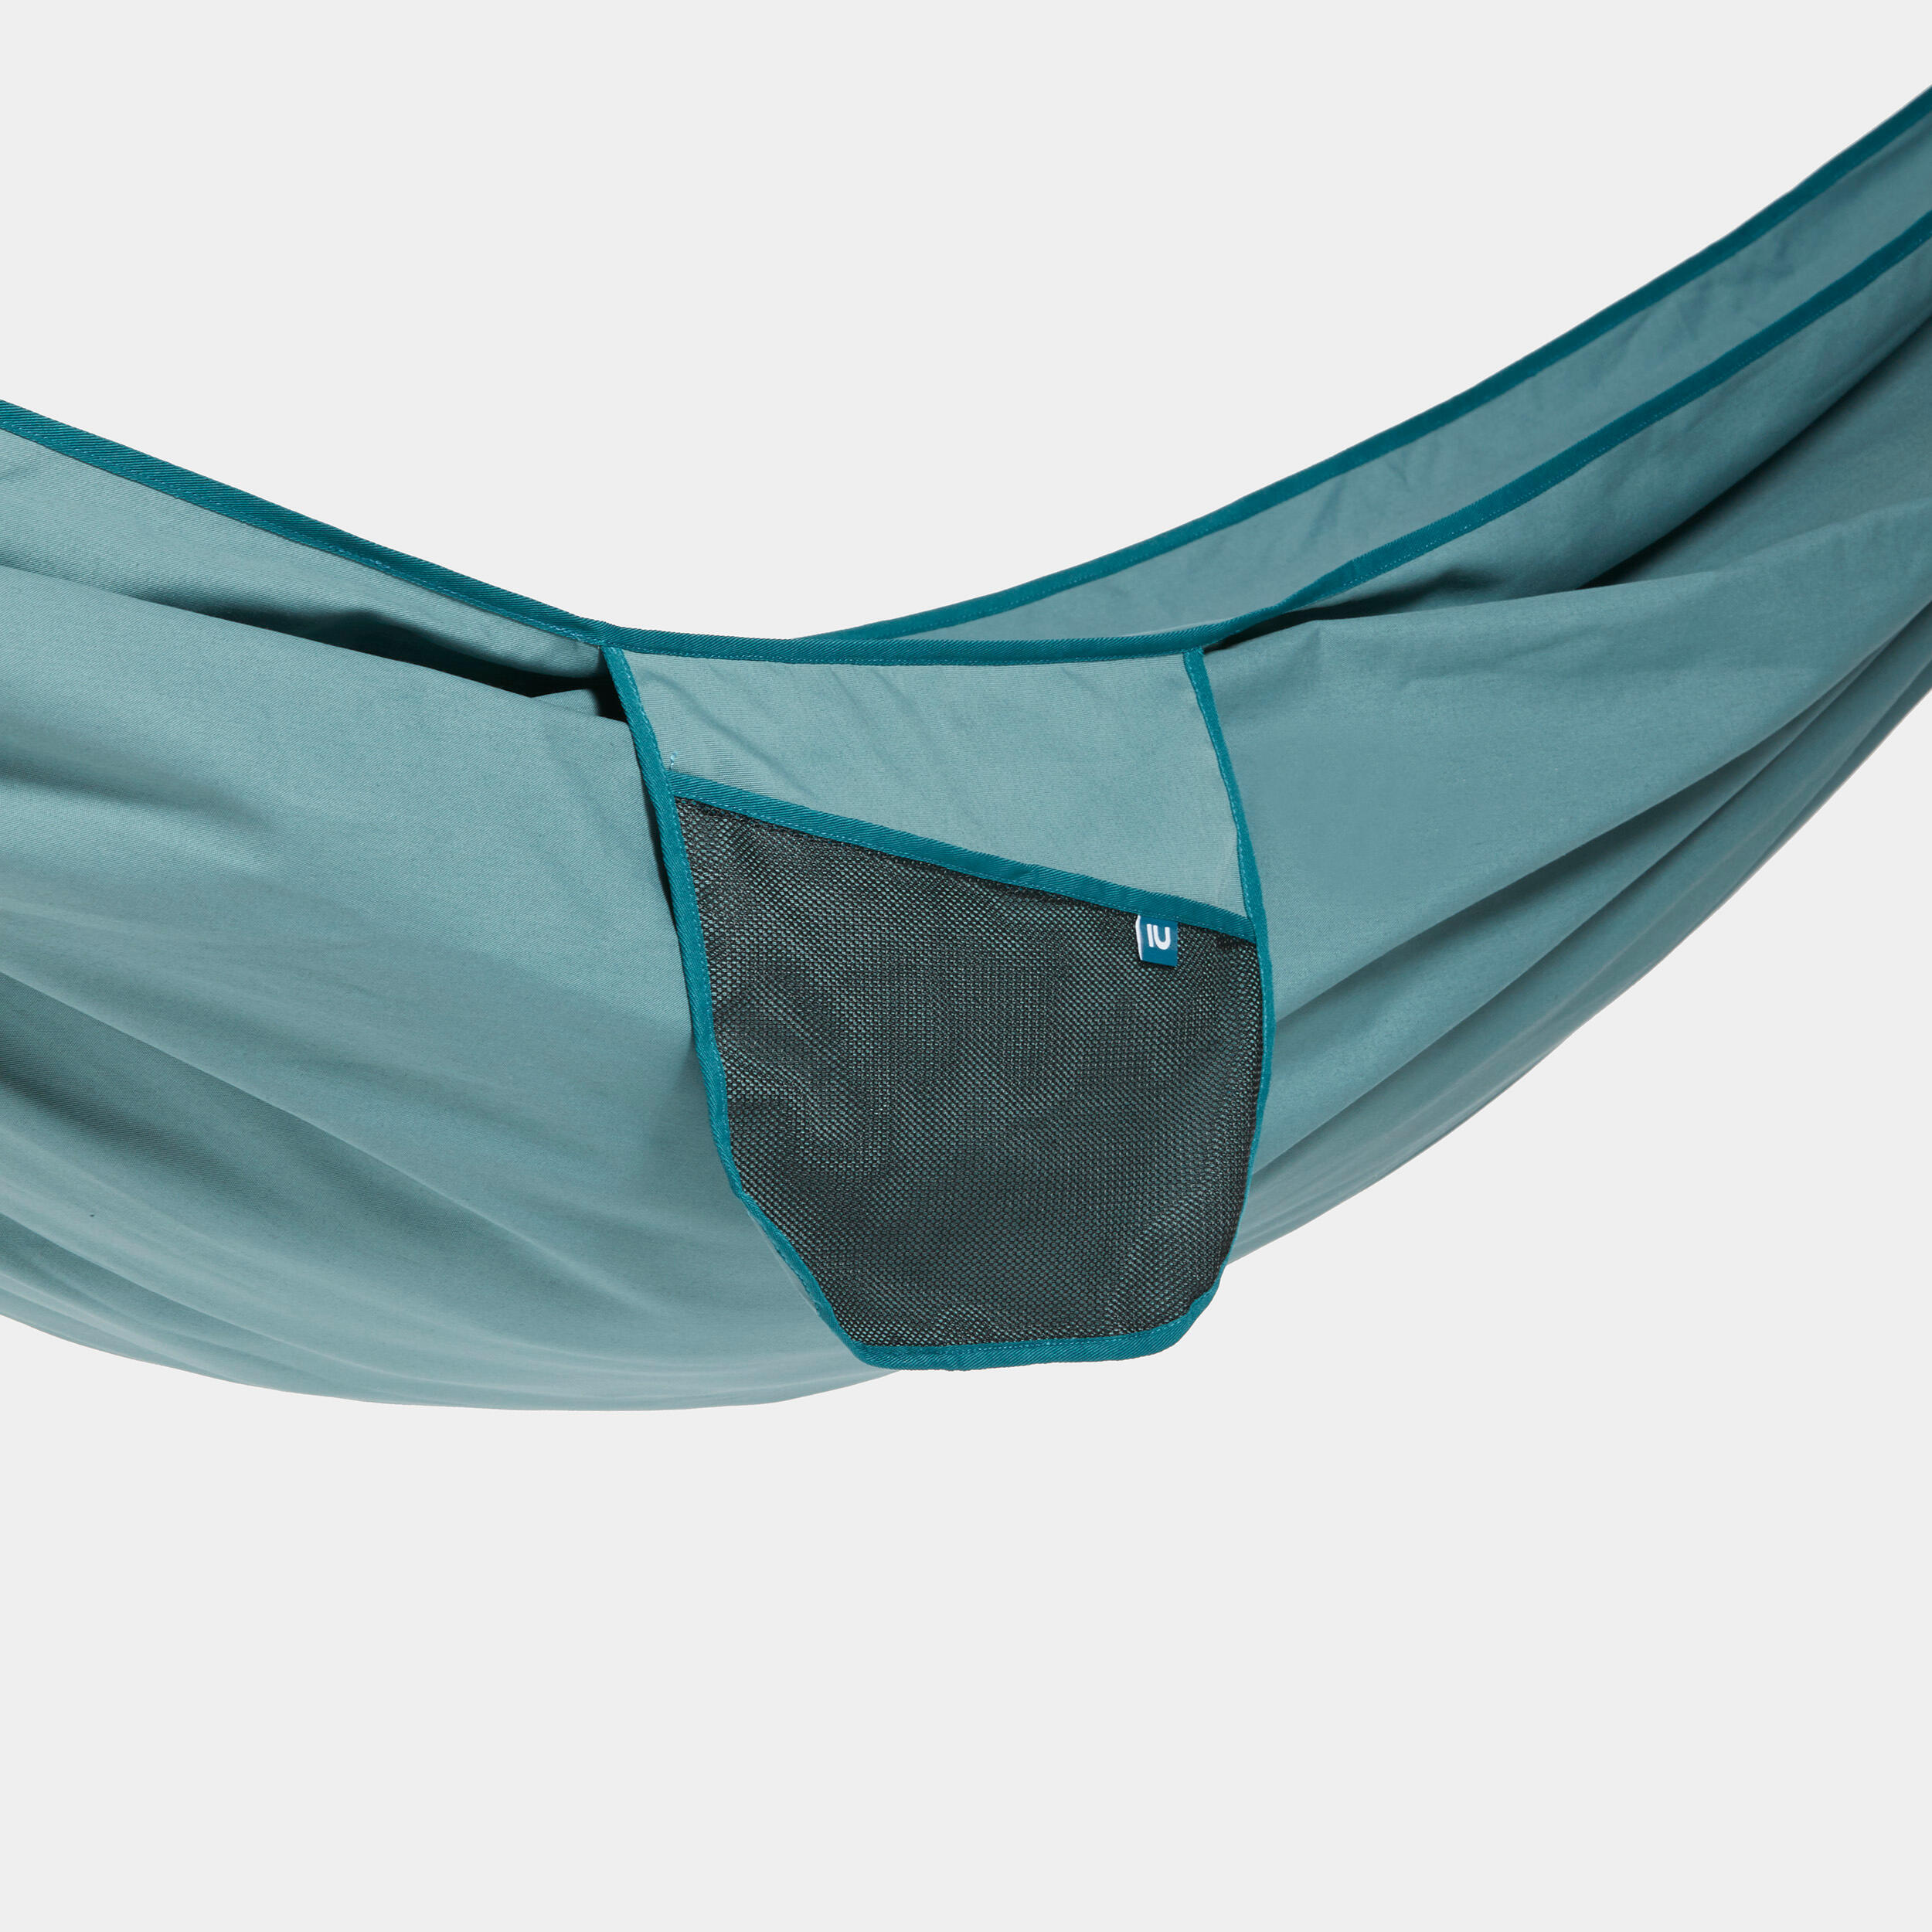 Two-person Polycotton Hammock - Ultim Comfort 350 x 180 cm - 2 Person 4/10